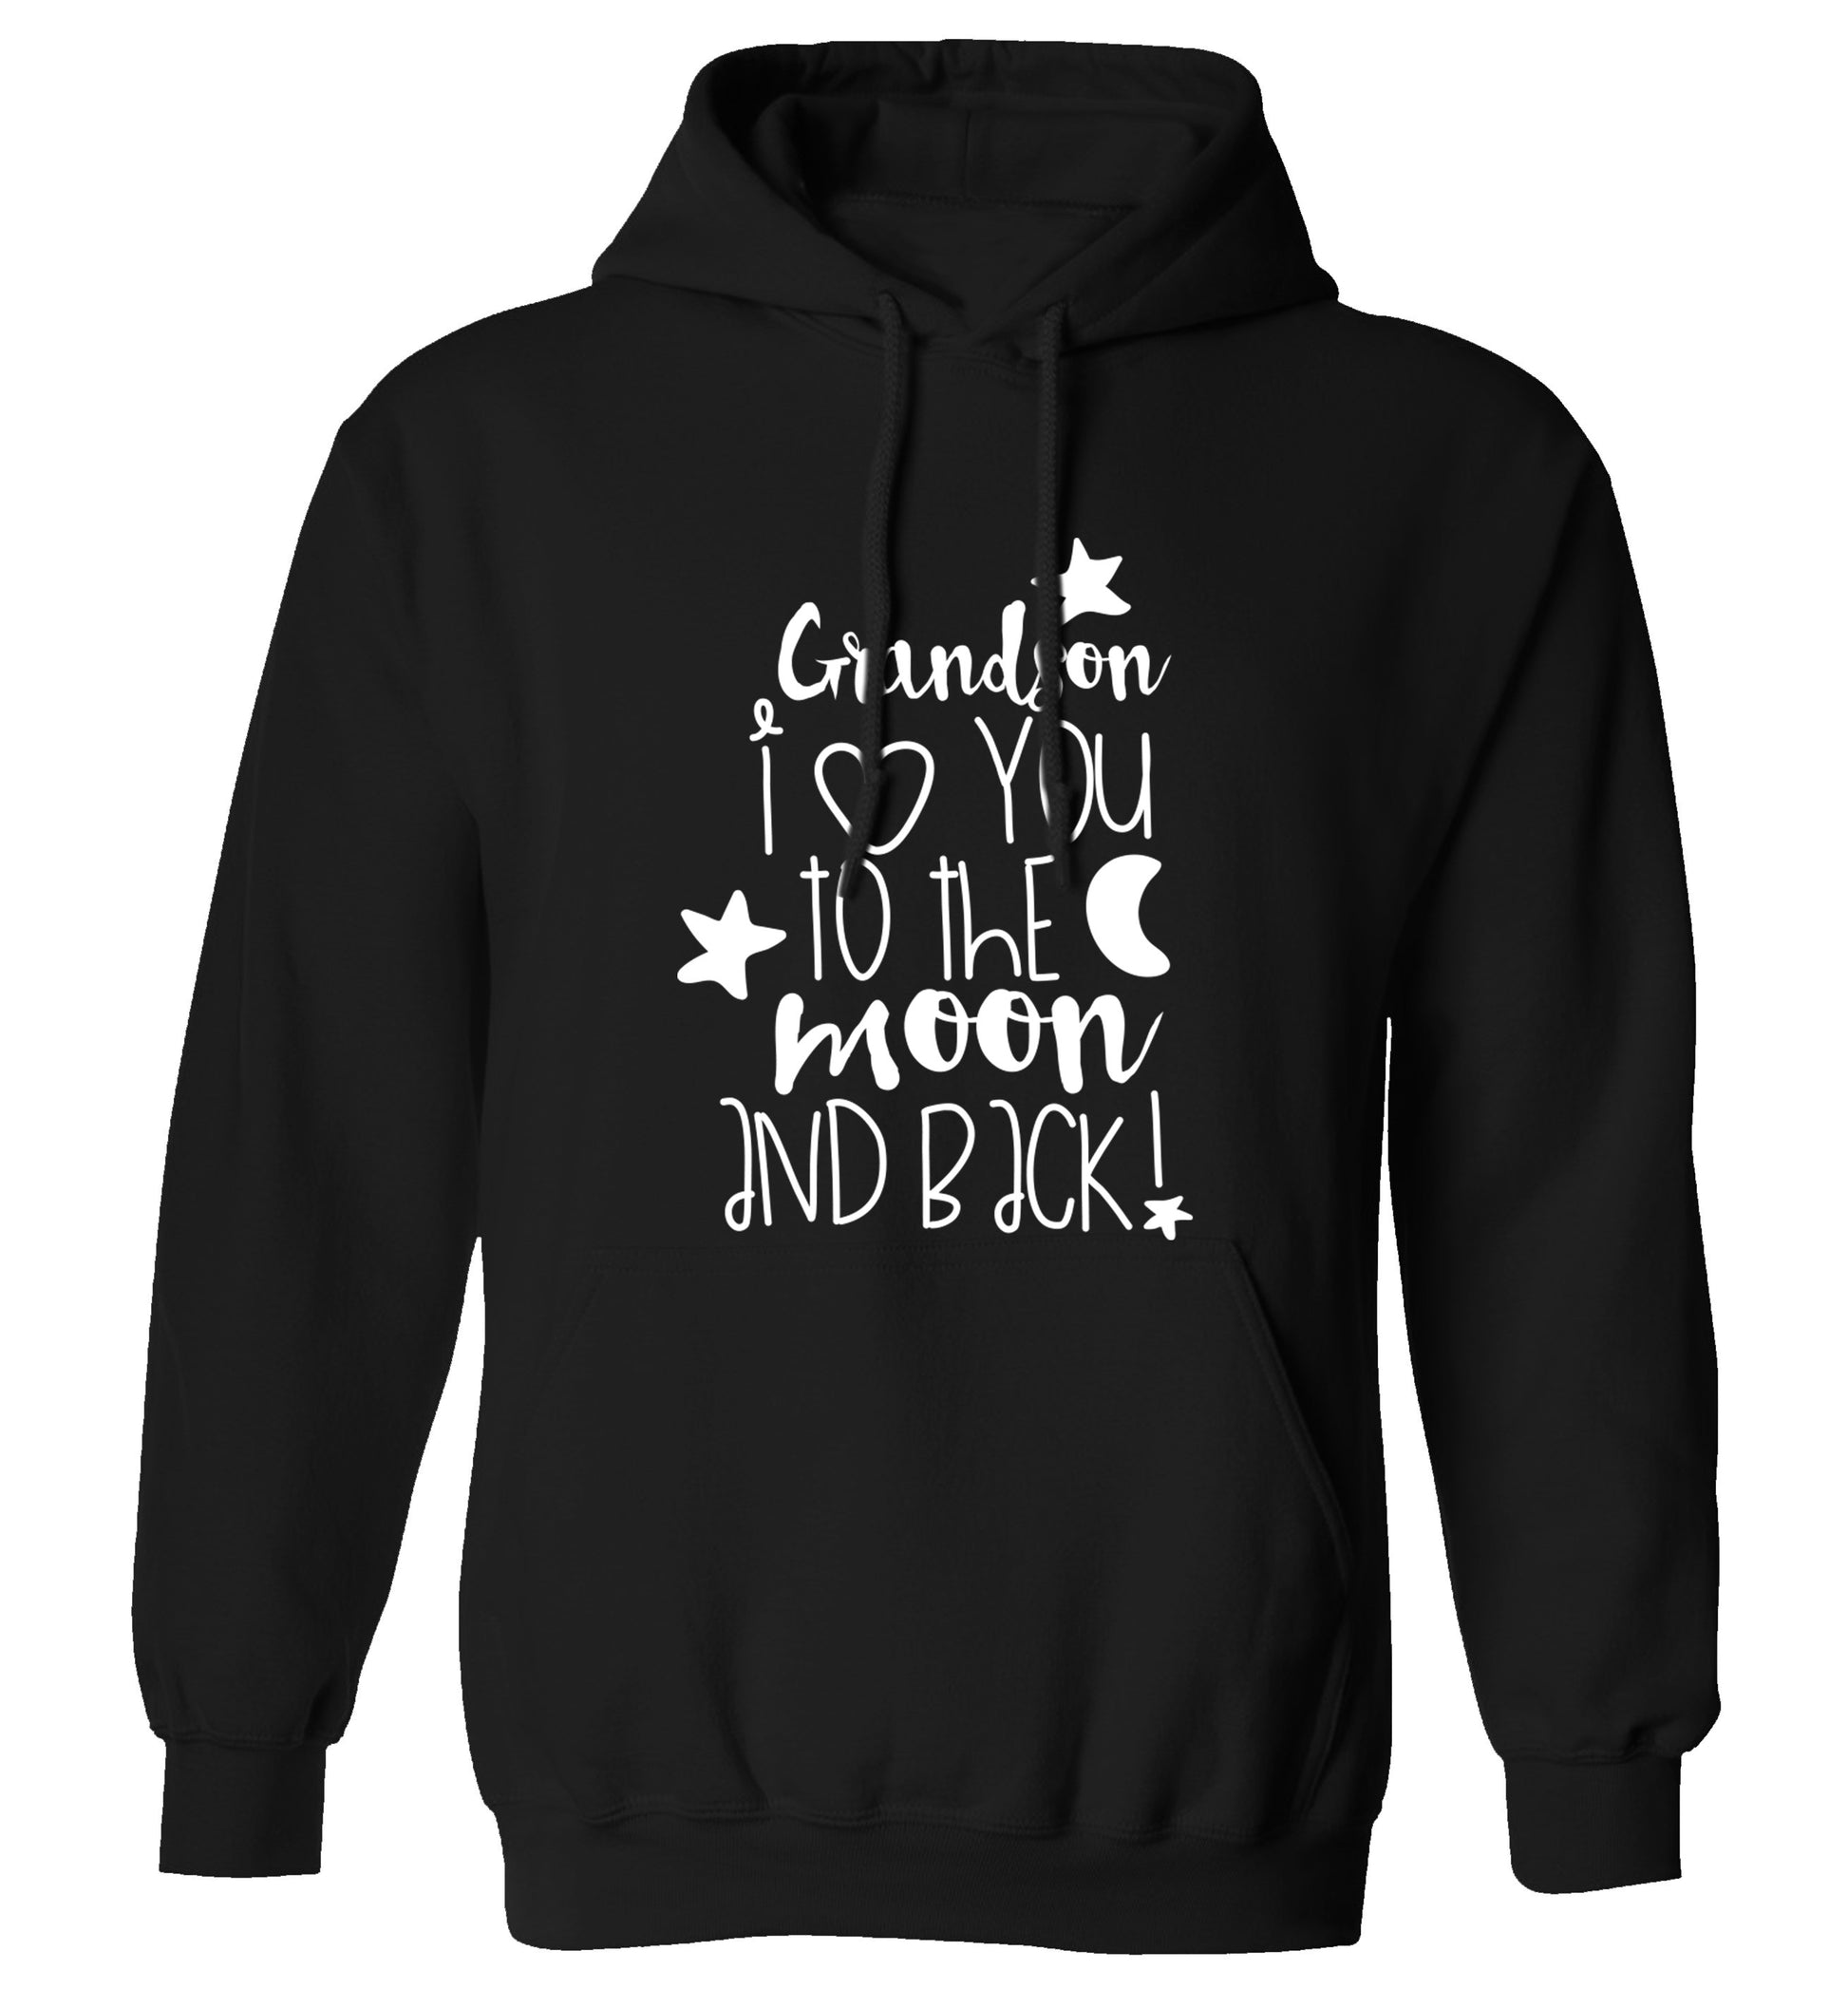 Grandson I love you to the moon and back adults unisex black hoodie 2XL